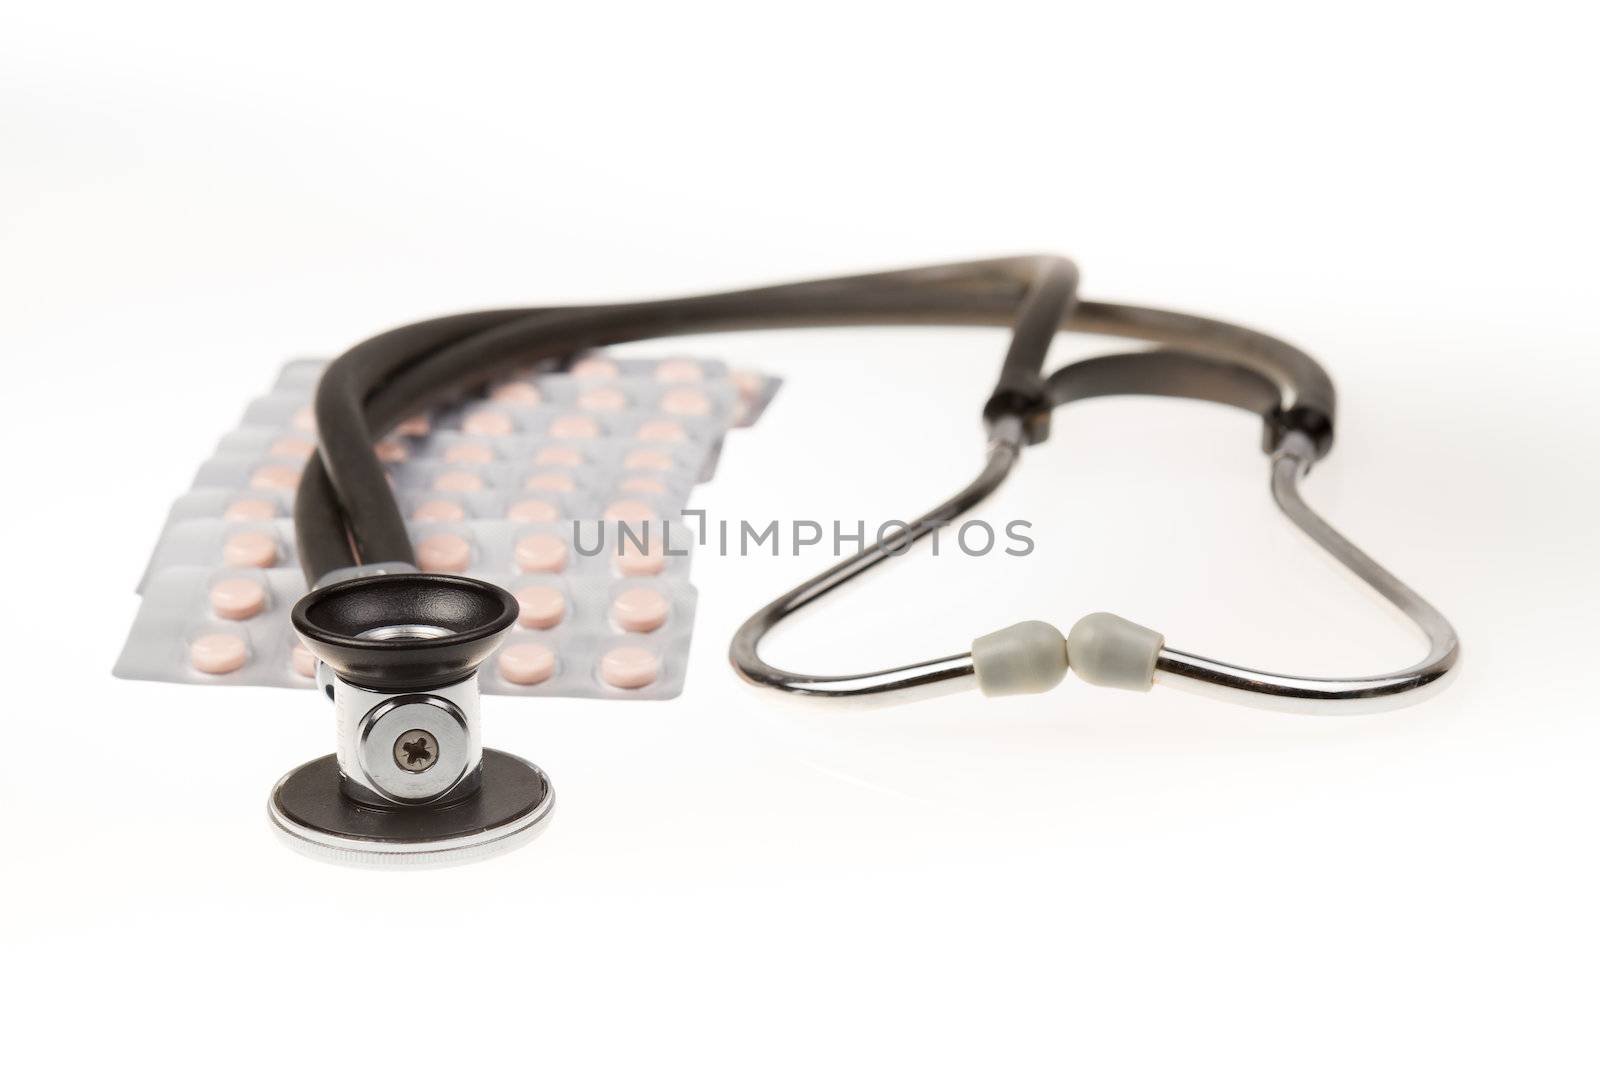 Stethoscope and tablets on isolated white background